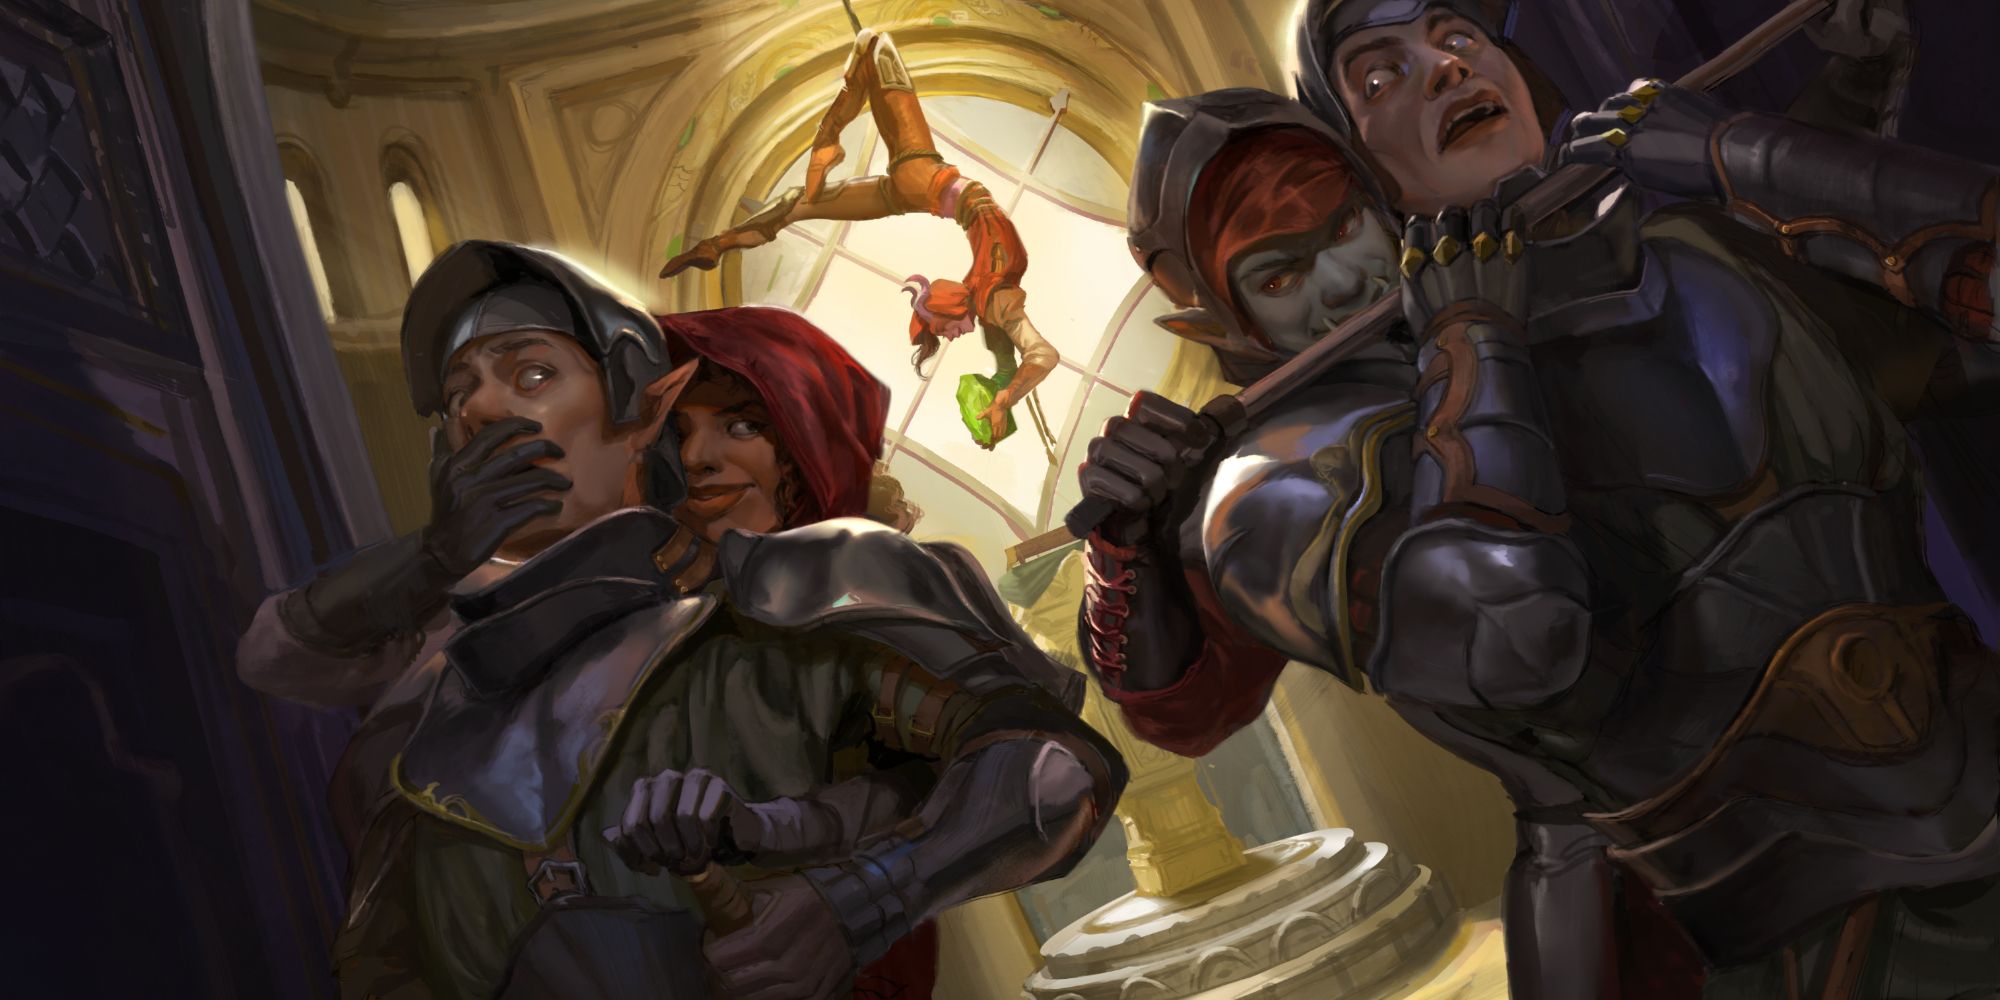 Two characters hold the guards hostage while the other steals the treasure.